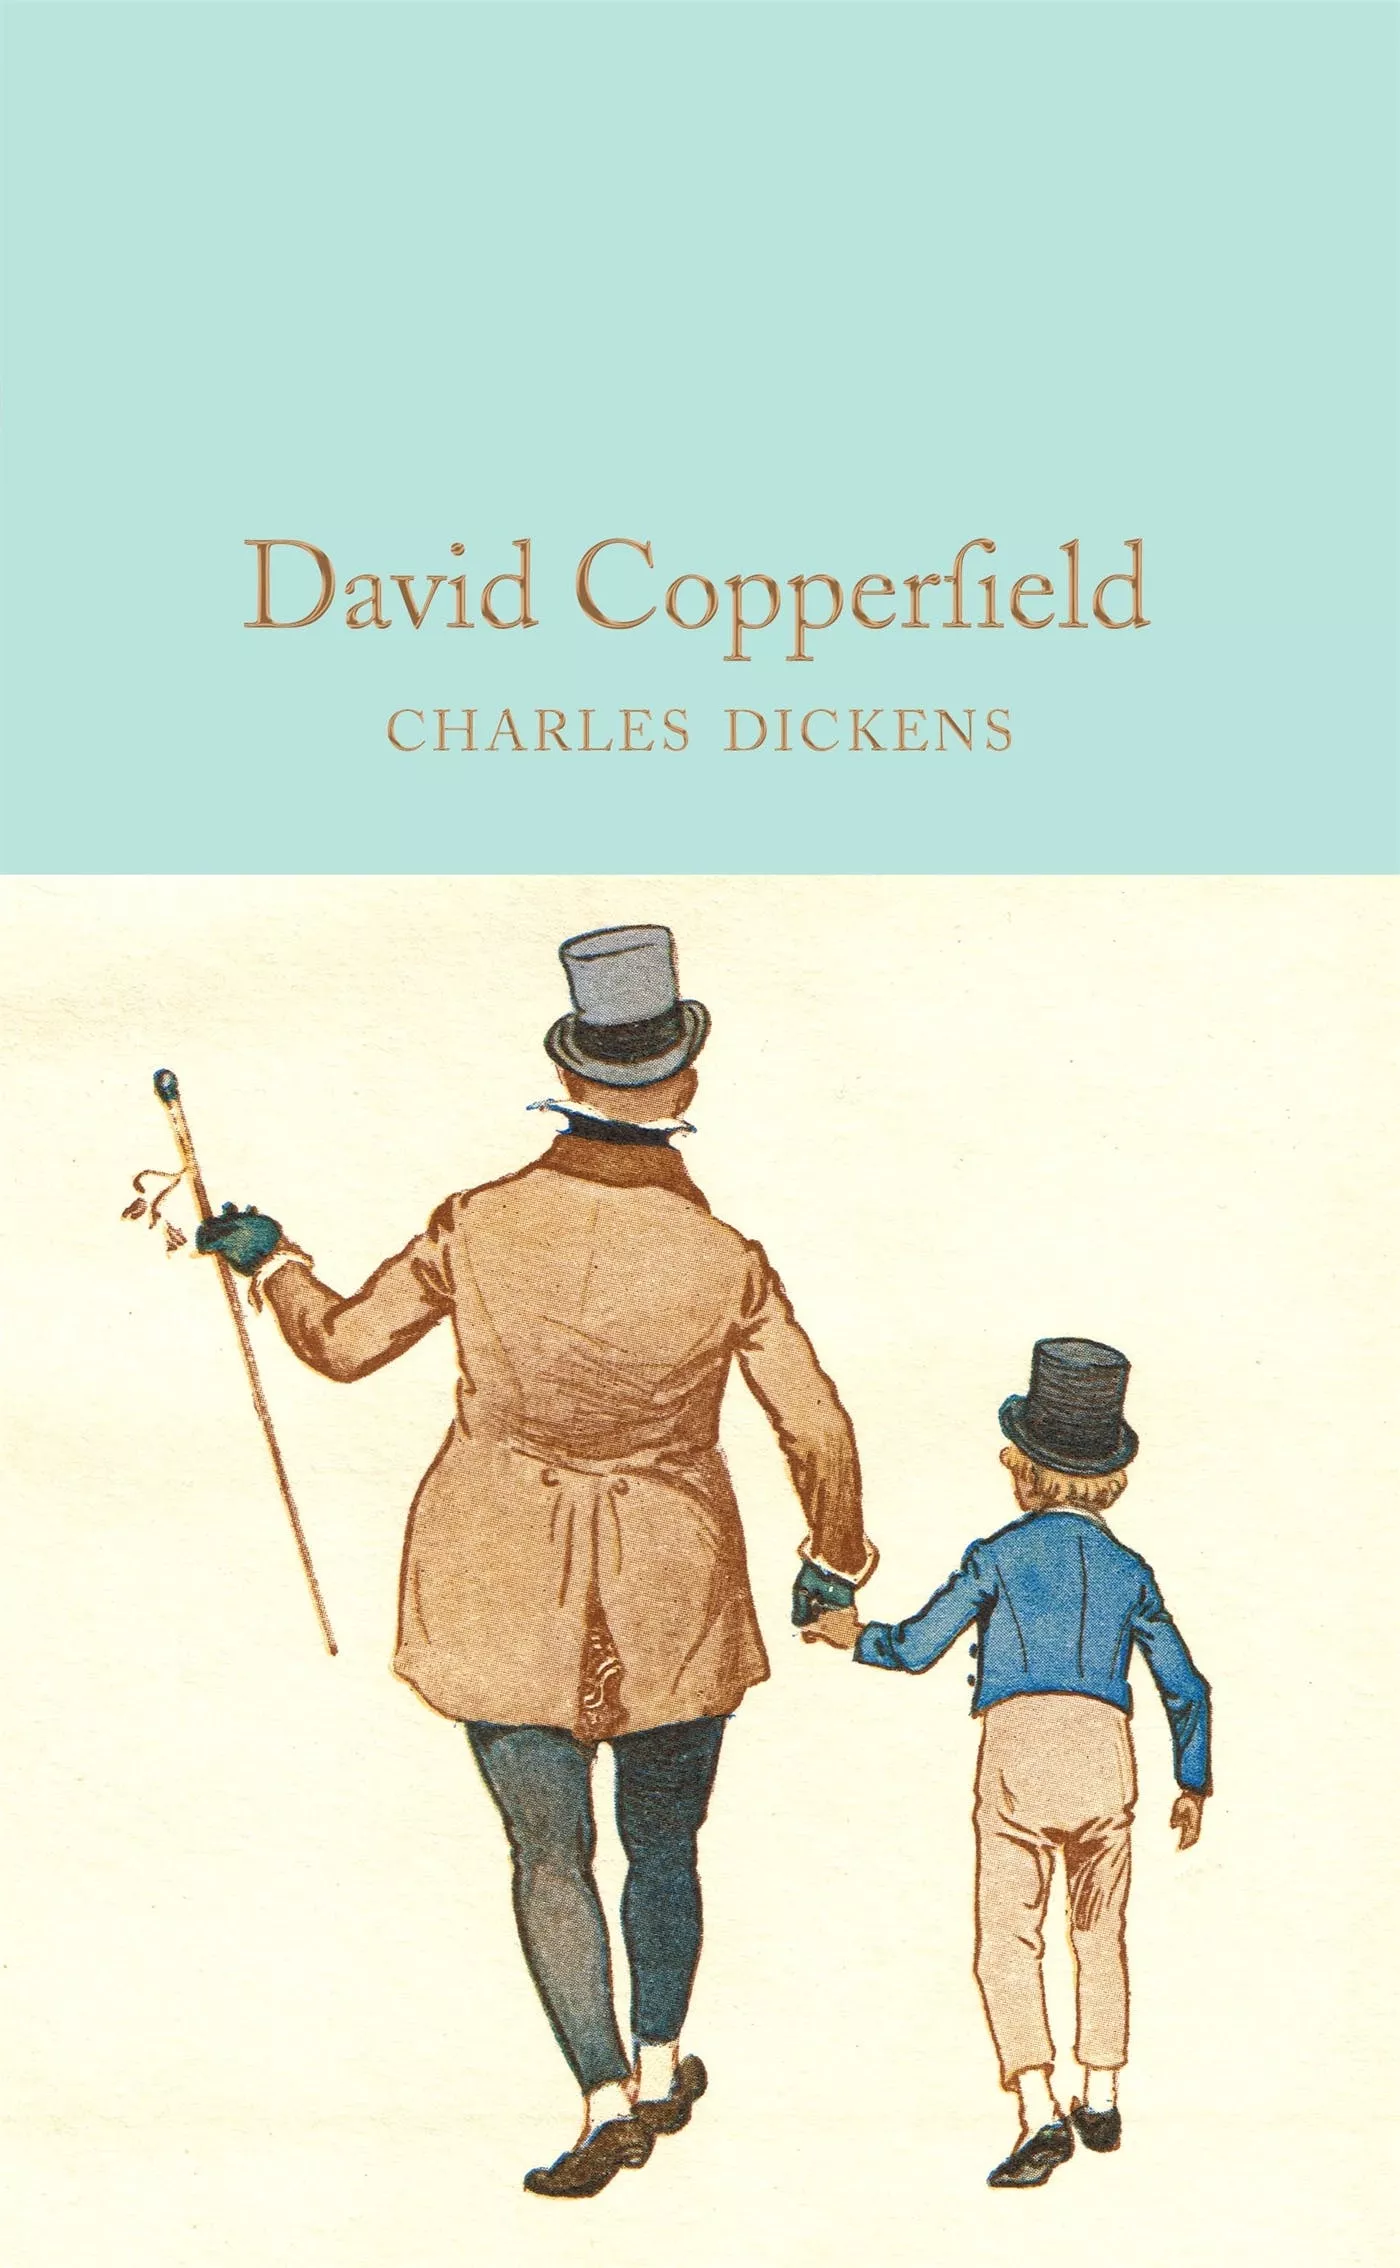 Charles Dickens, David Copperfield